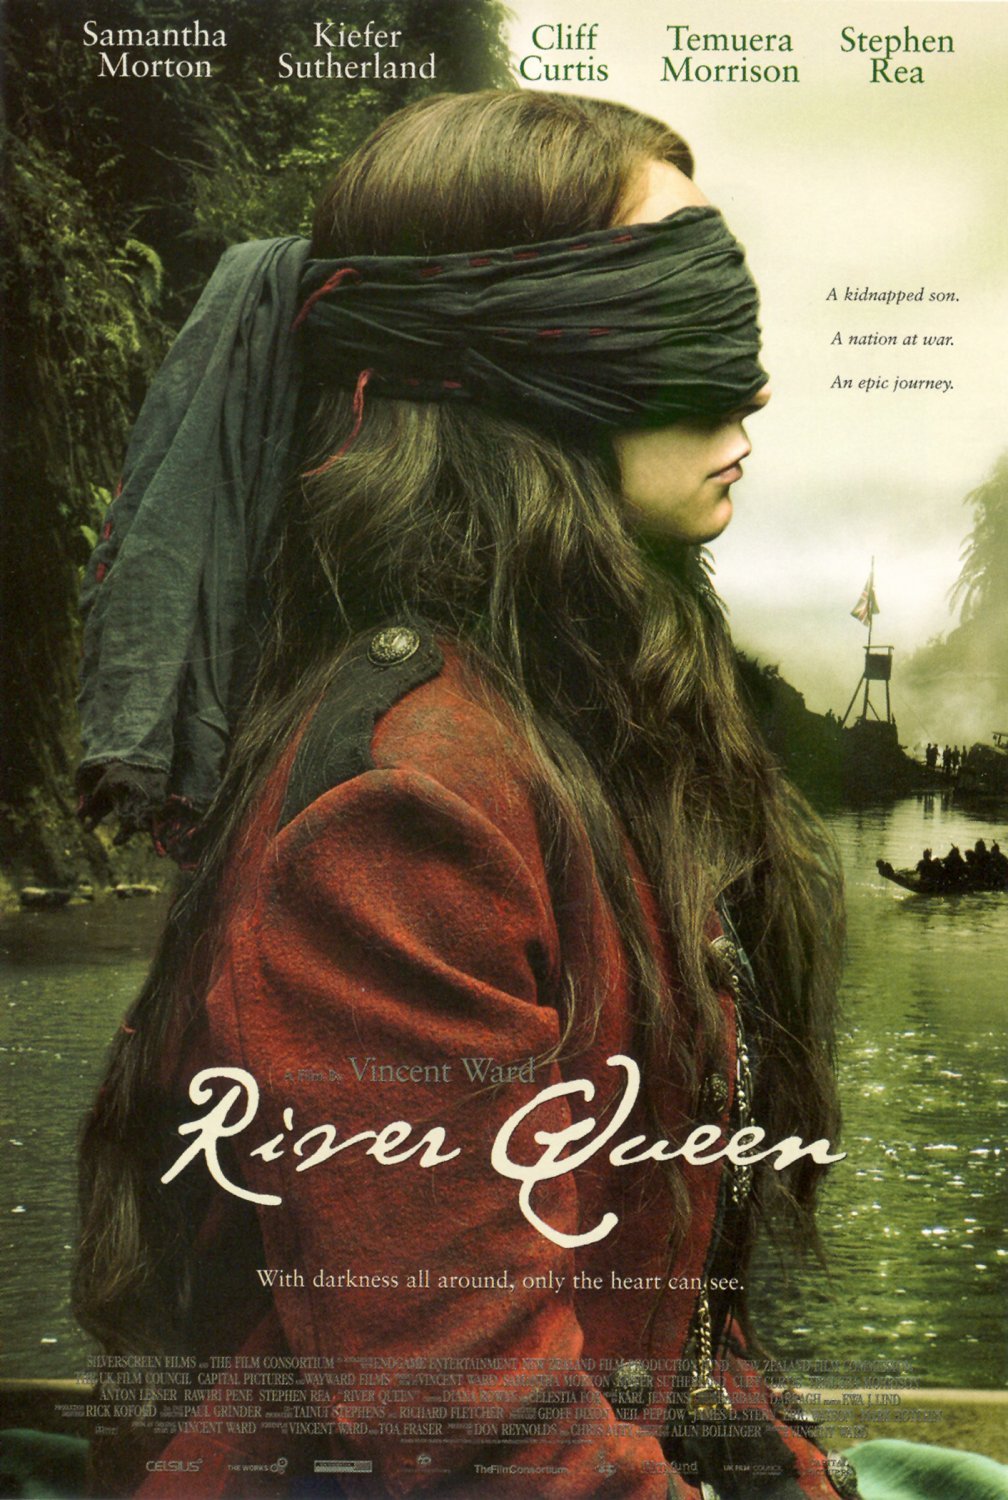 Poster of the movie River Queen